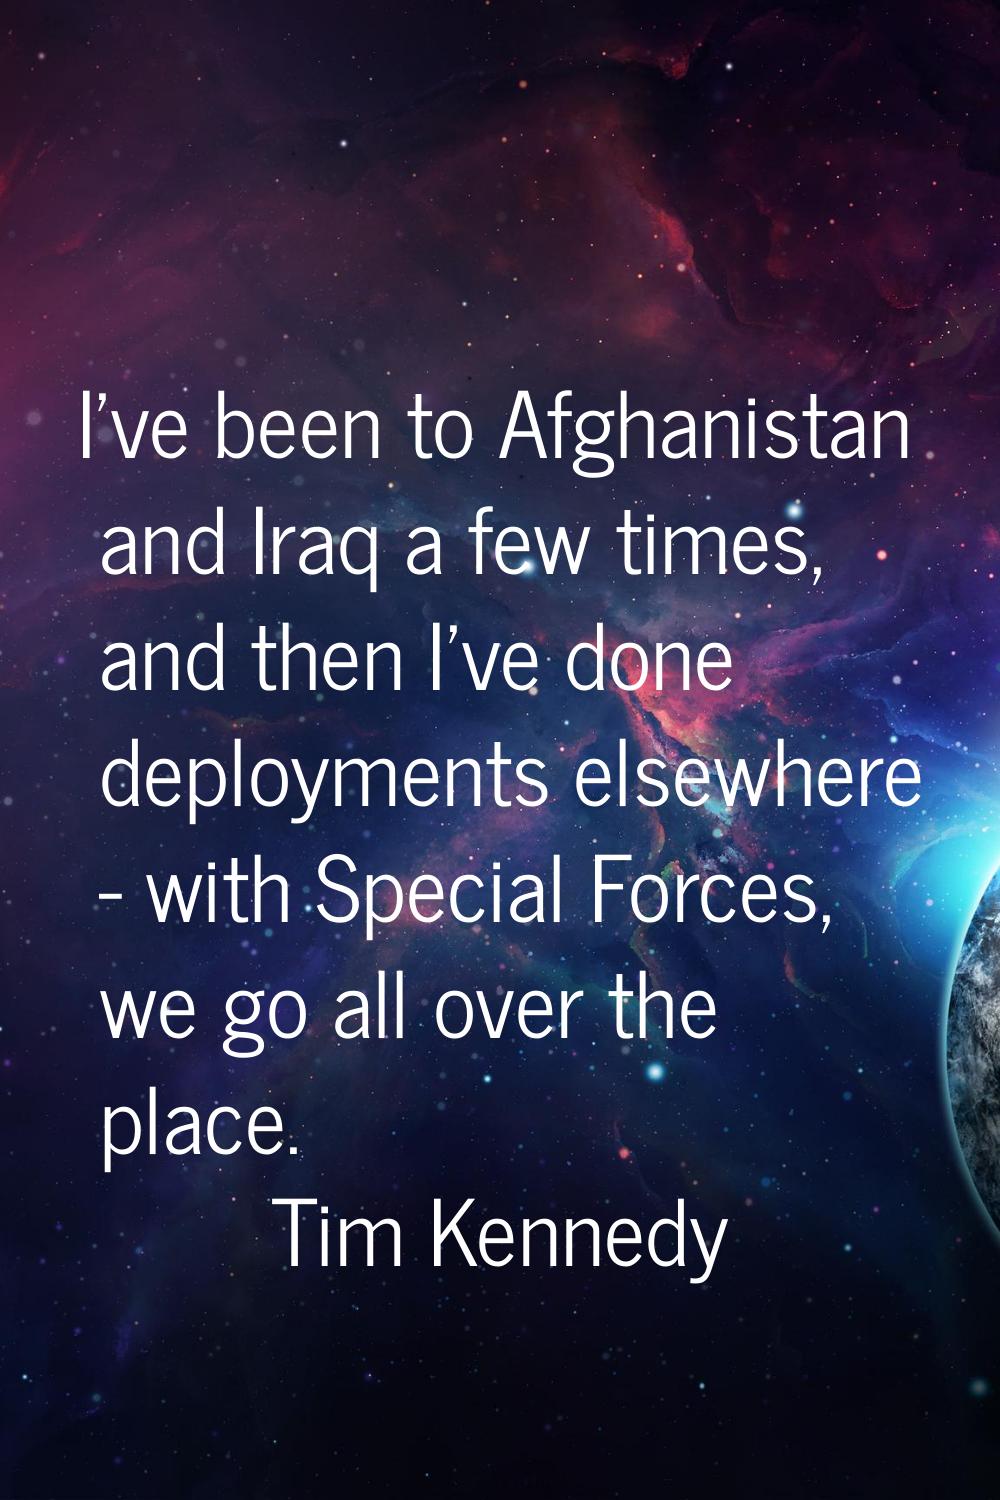 I've been to Afghanistan and Iraq a few times, and then I've done deployments elsewhere - with Spec